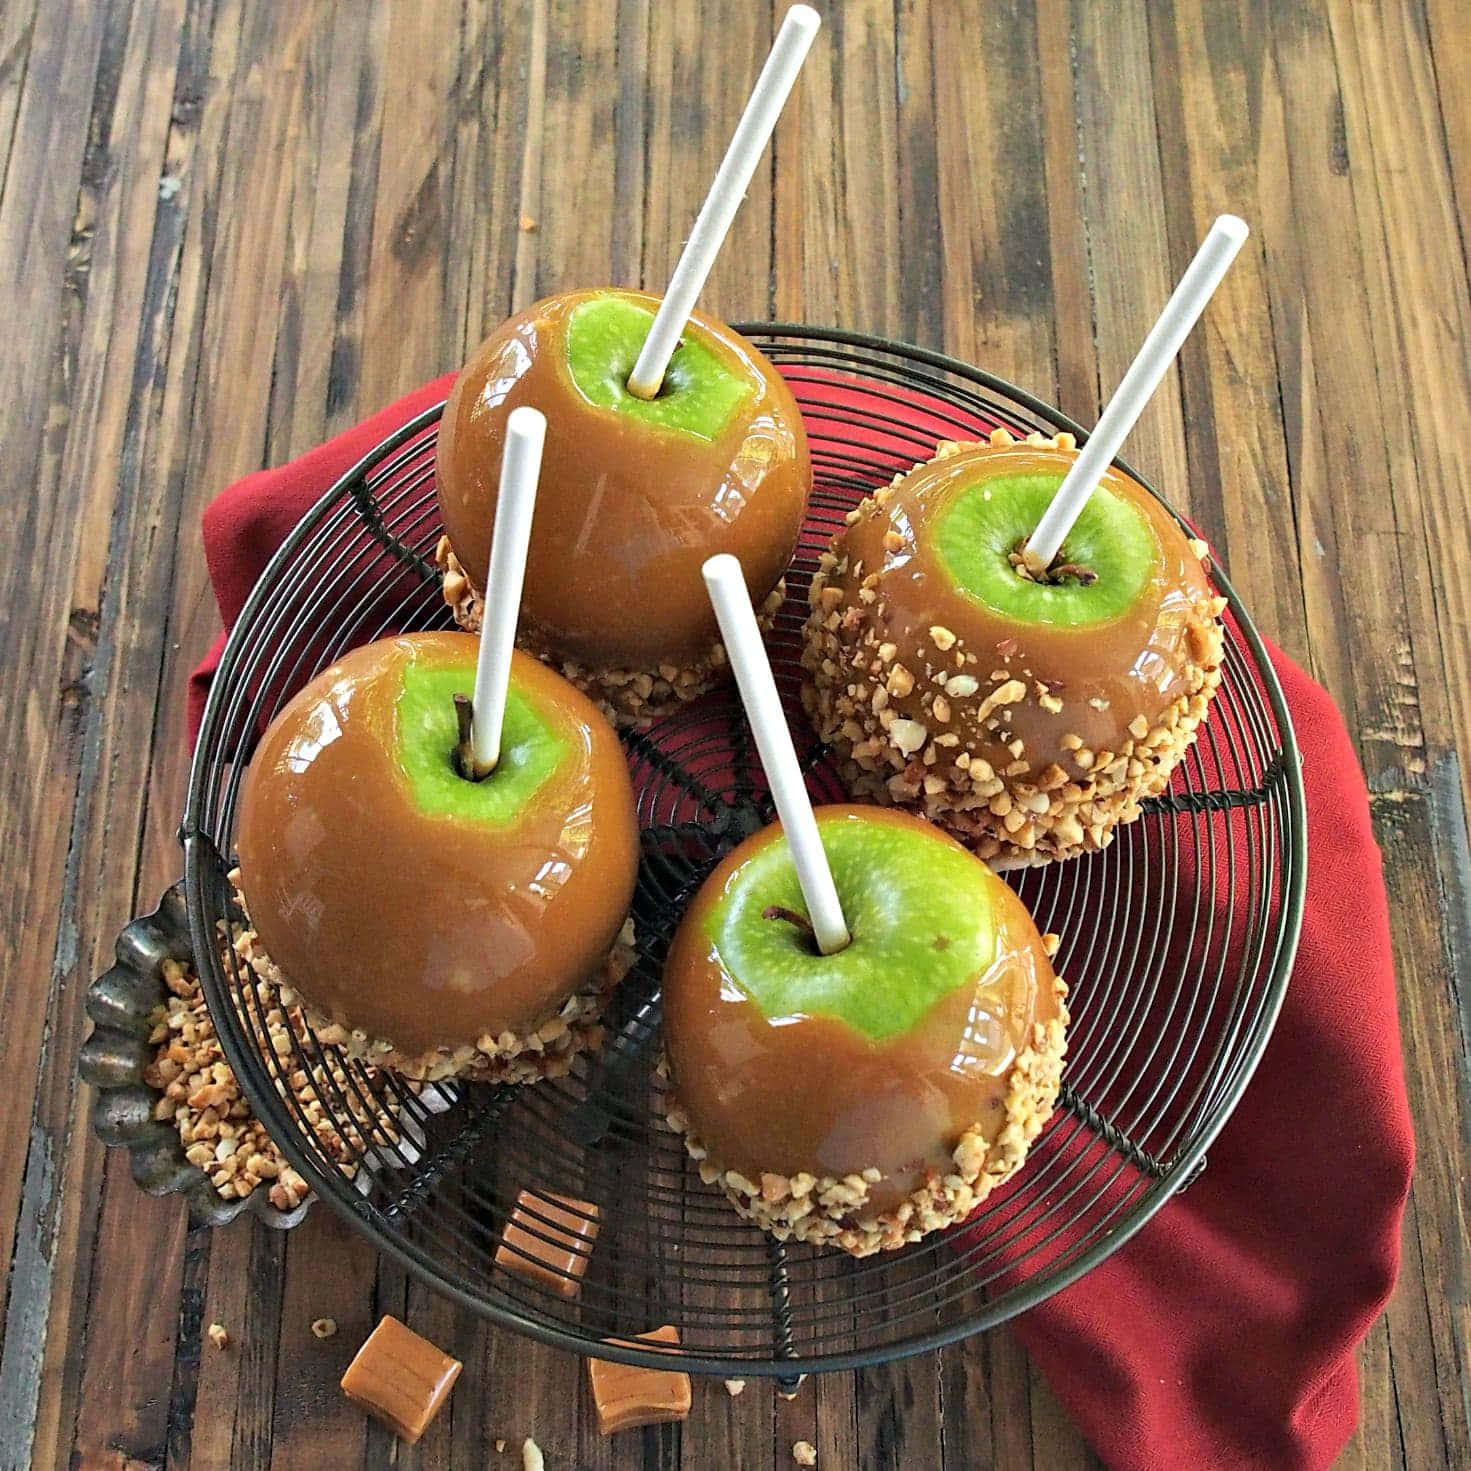 Delicious Caramel Apples on a Rustic Wooden Table Wallpaper